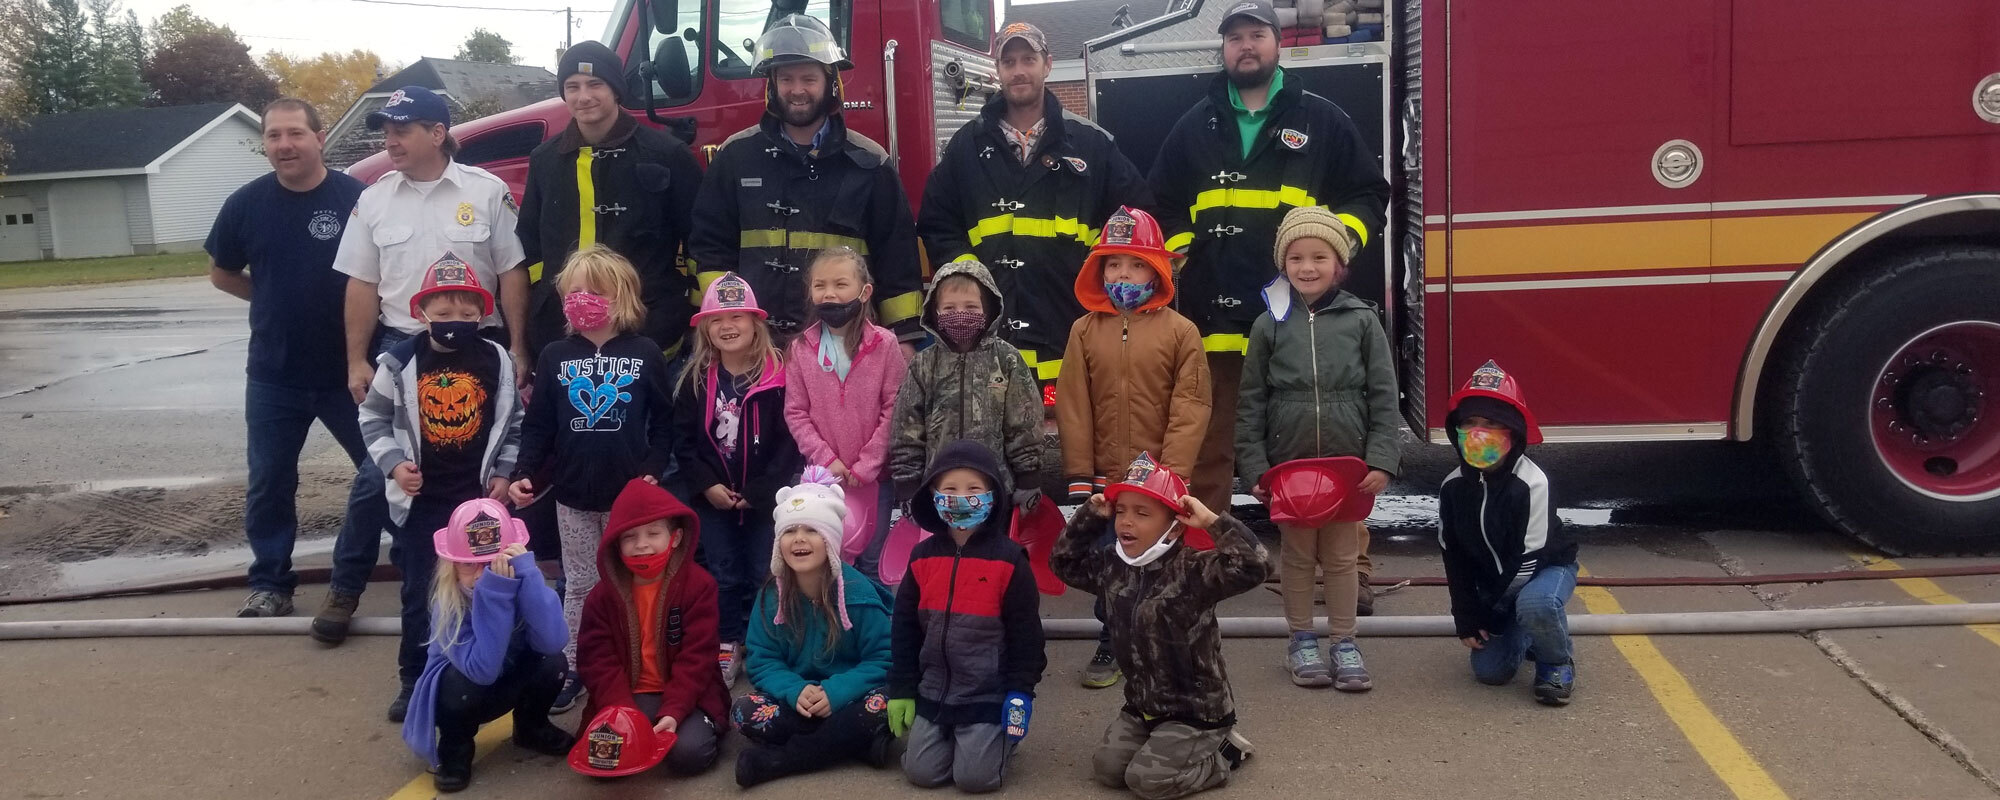 Kindergarten students pose with the fire department in front of a fire truck